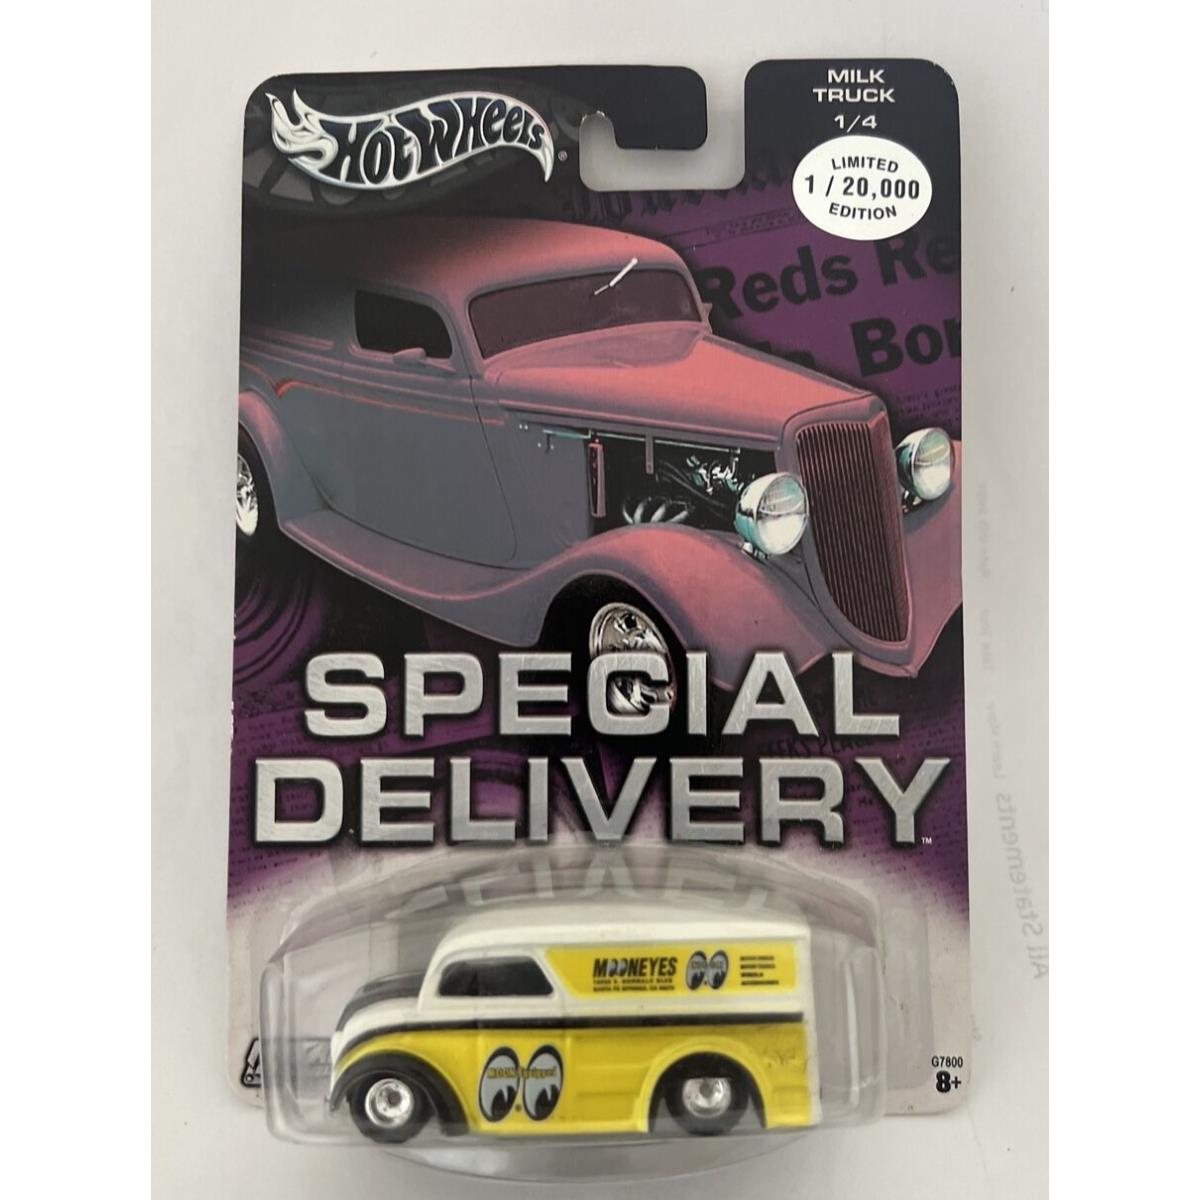 Hot Wheels Special Delivery Milk Truck Mooneyes 1 of 4 Limited Edition 1/20 000